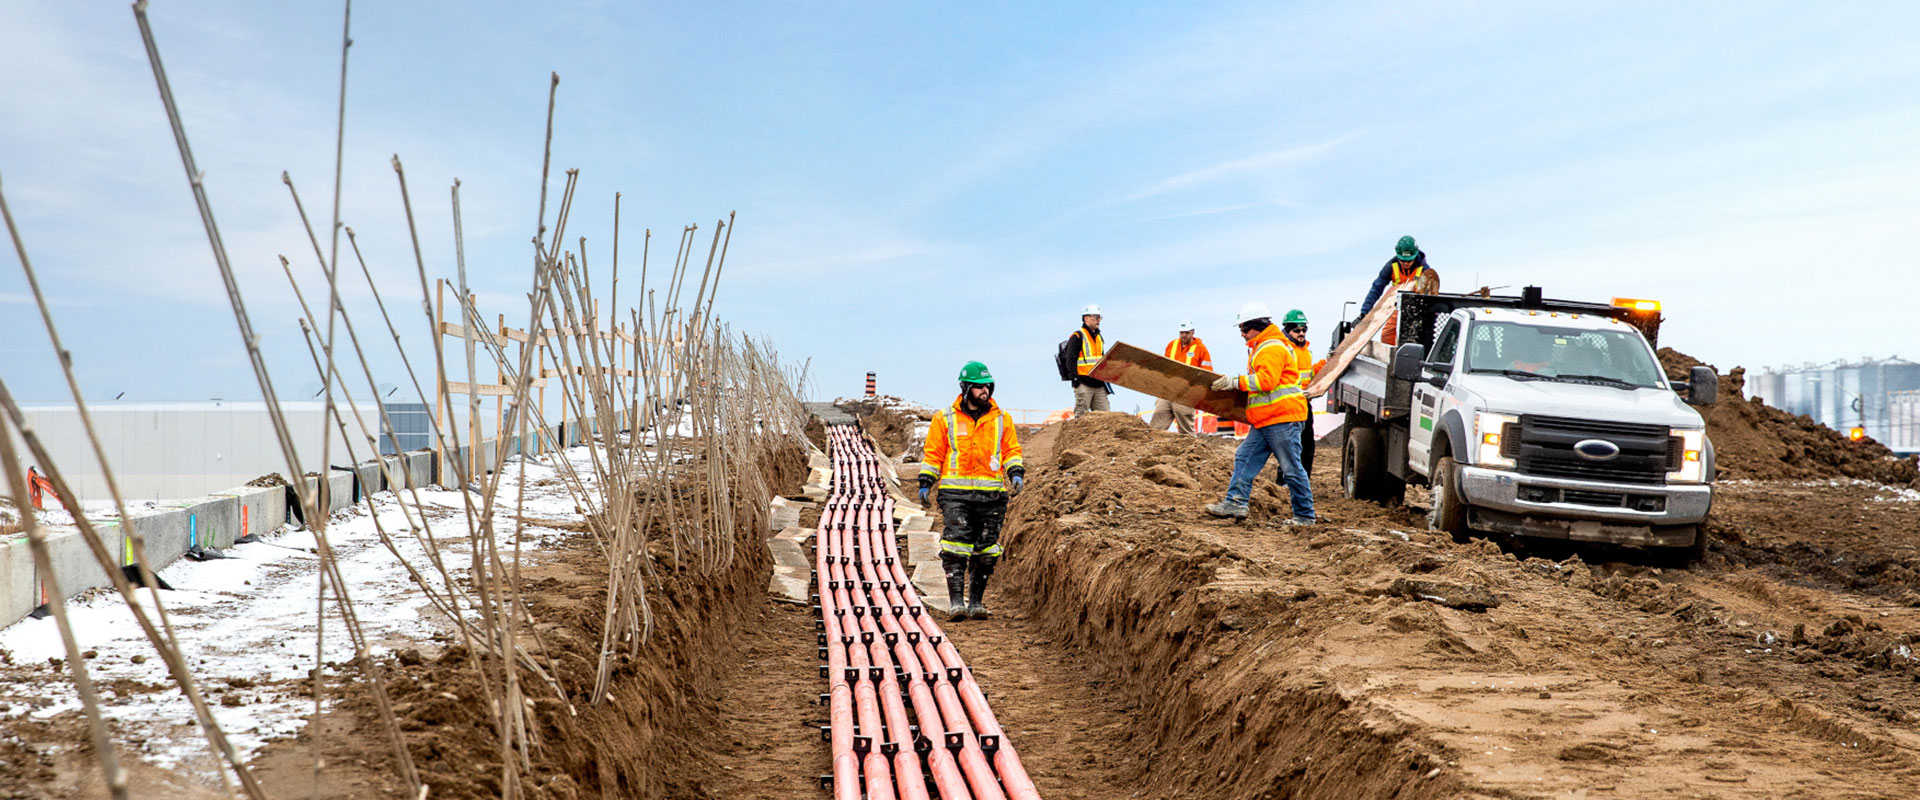 A team of B&M construction workers implementing an underground fiber optic cabling project